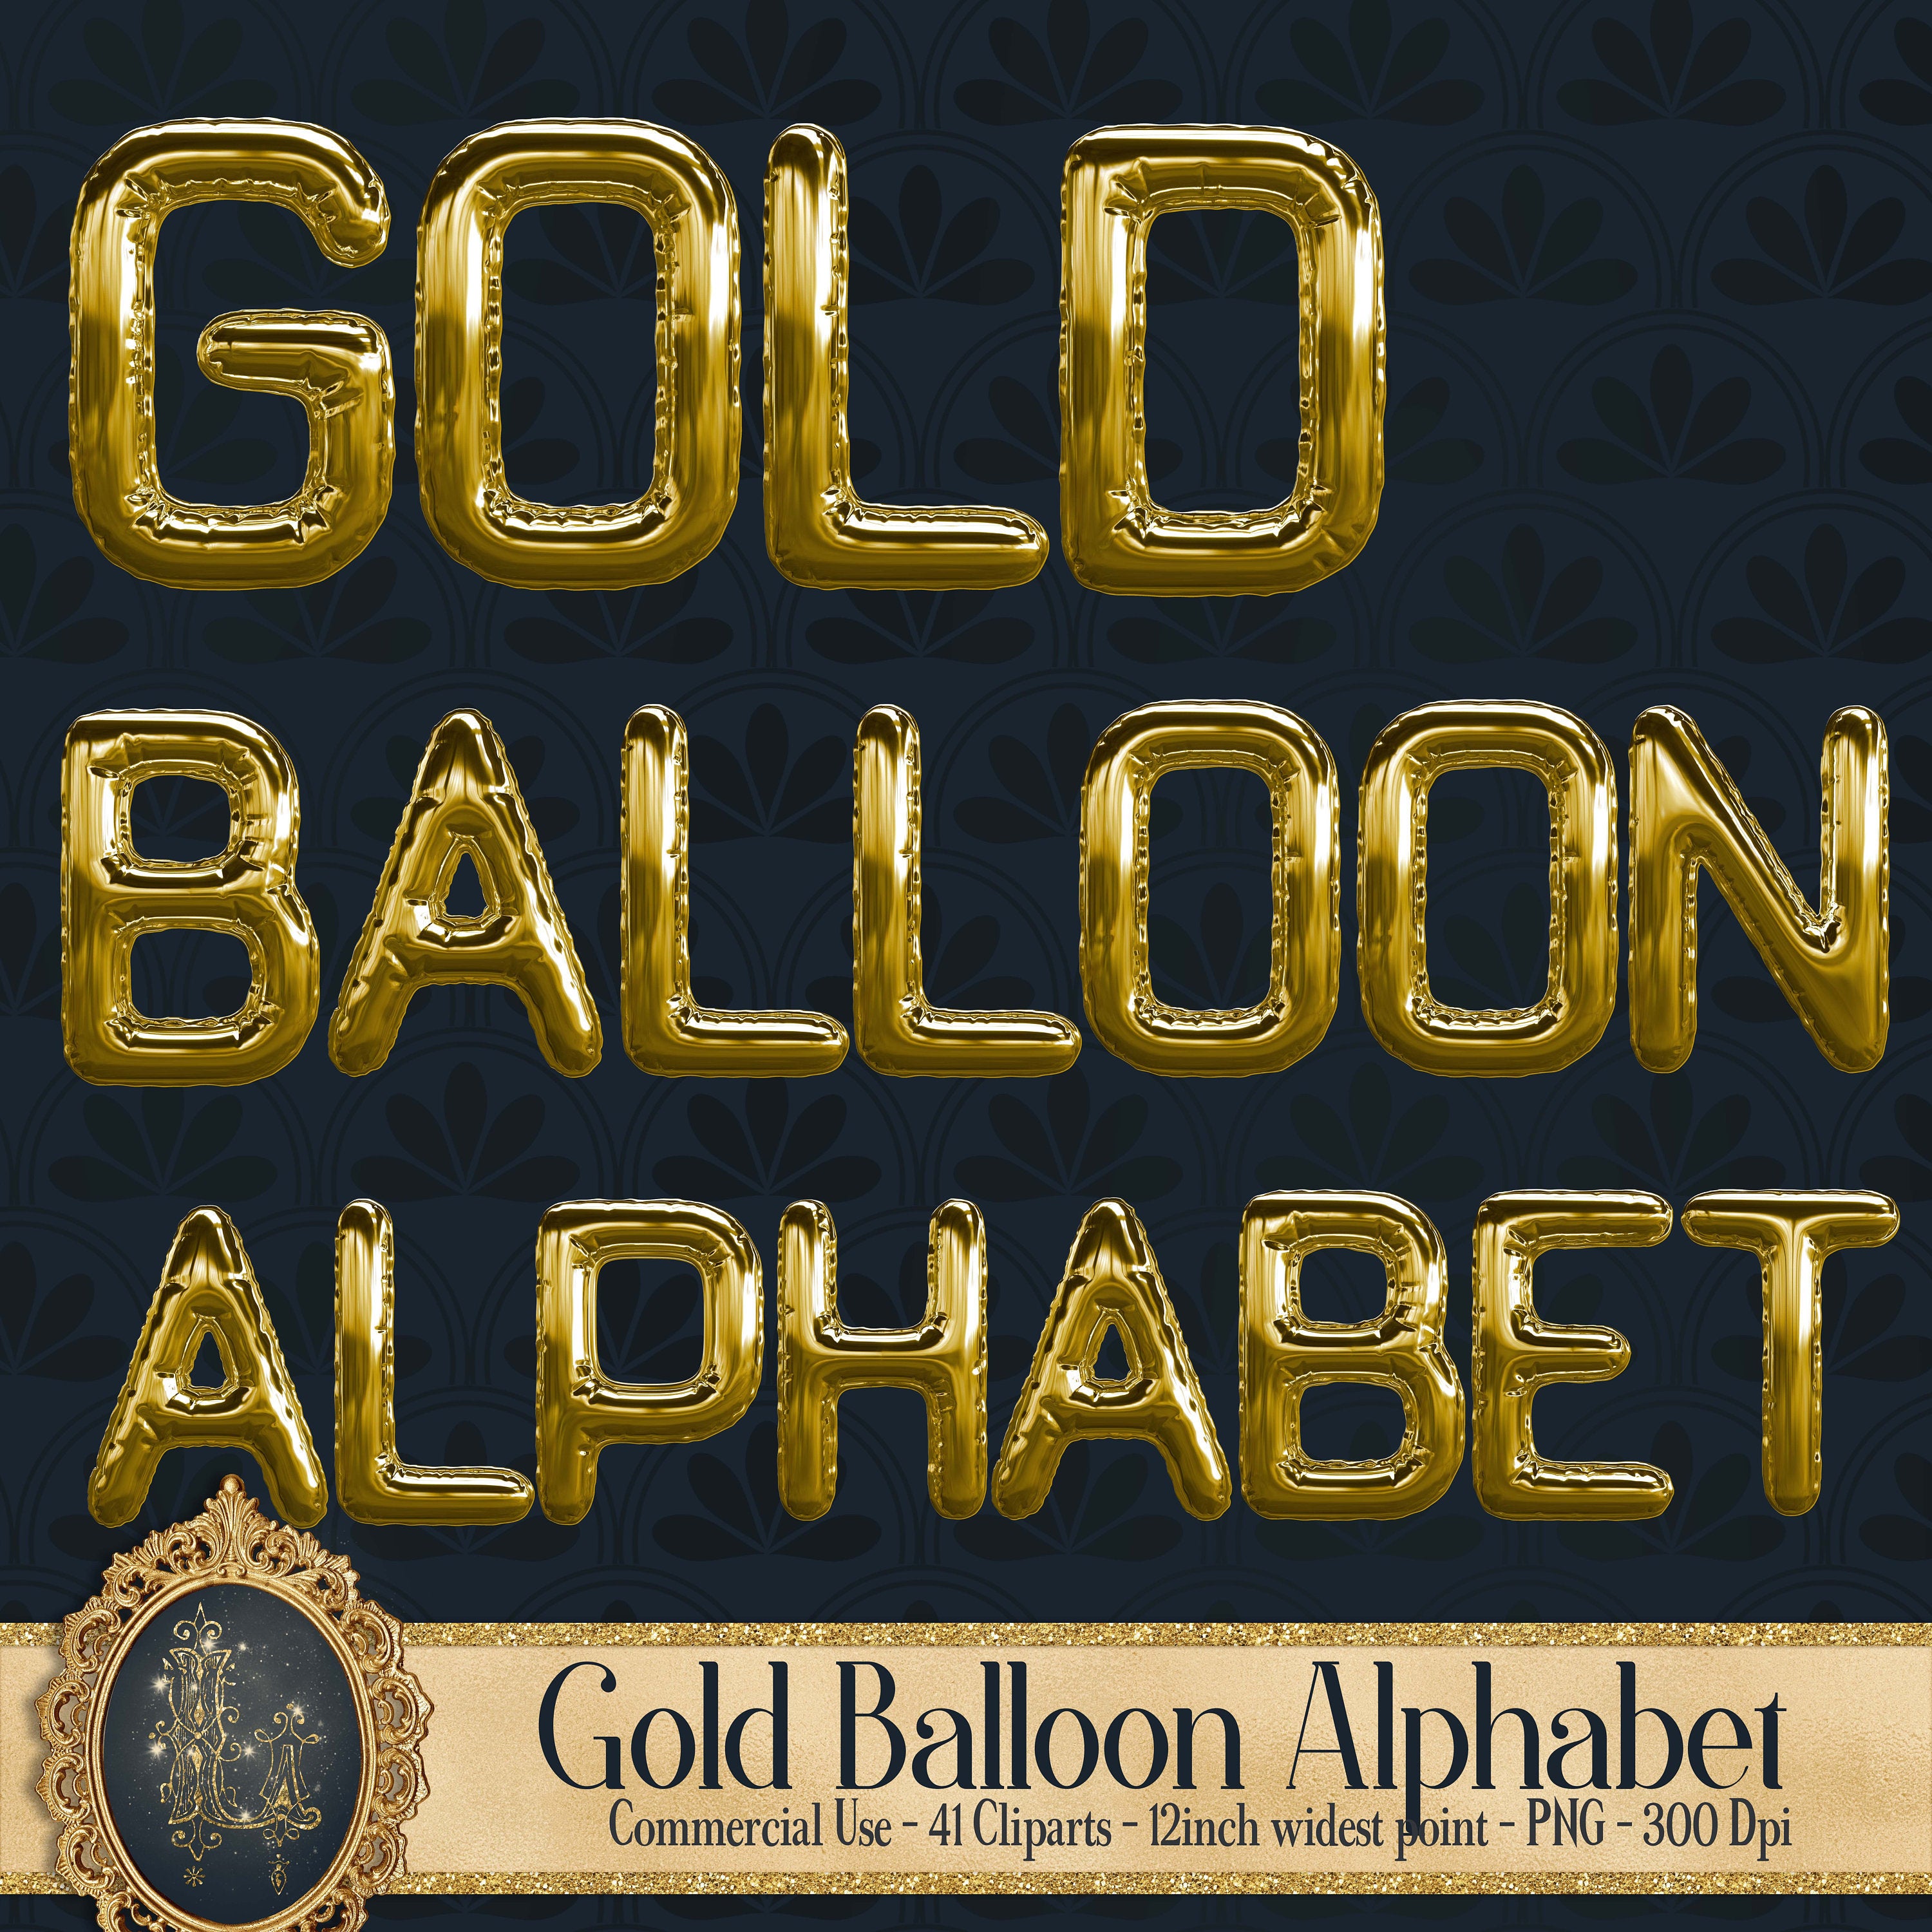 Gold Balloon Alphabet 41 Cliparts, 300 Dpi Planner Paper, Commercial Use, Scrapbook Paper, Digital Gold Alphabet Cliparts, Gold Balloon